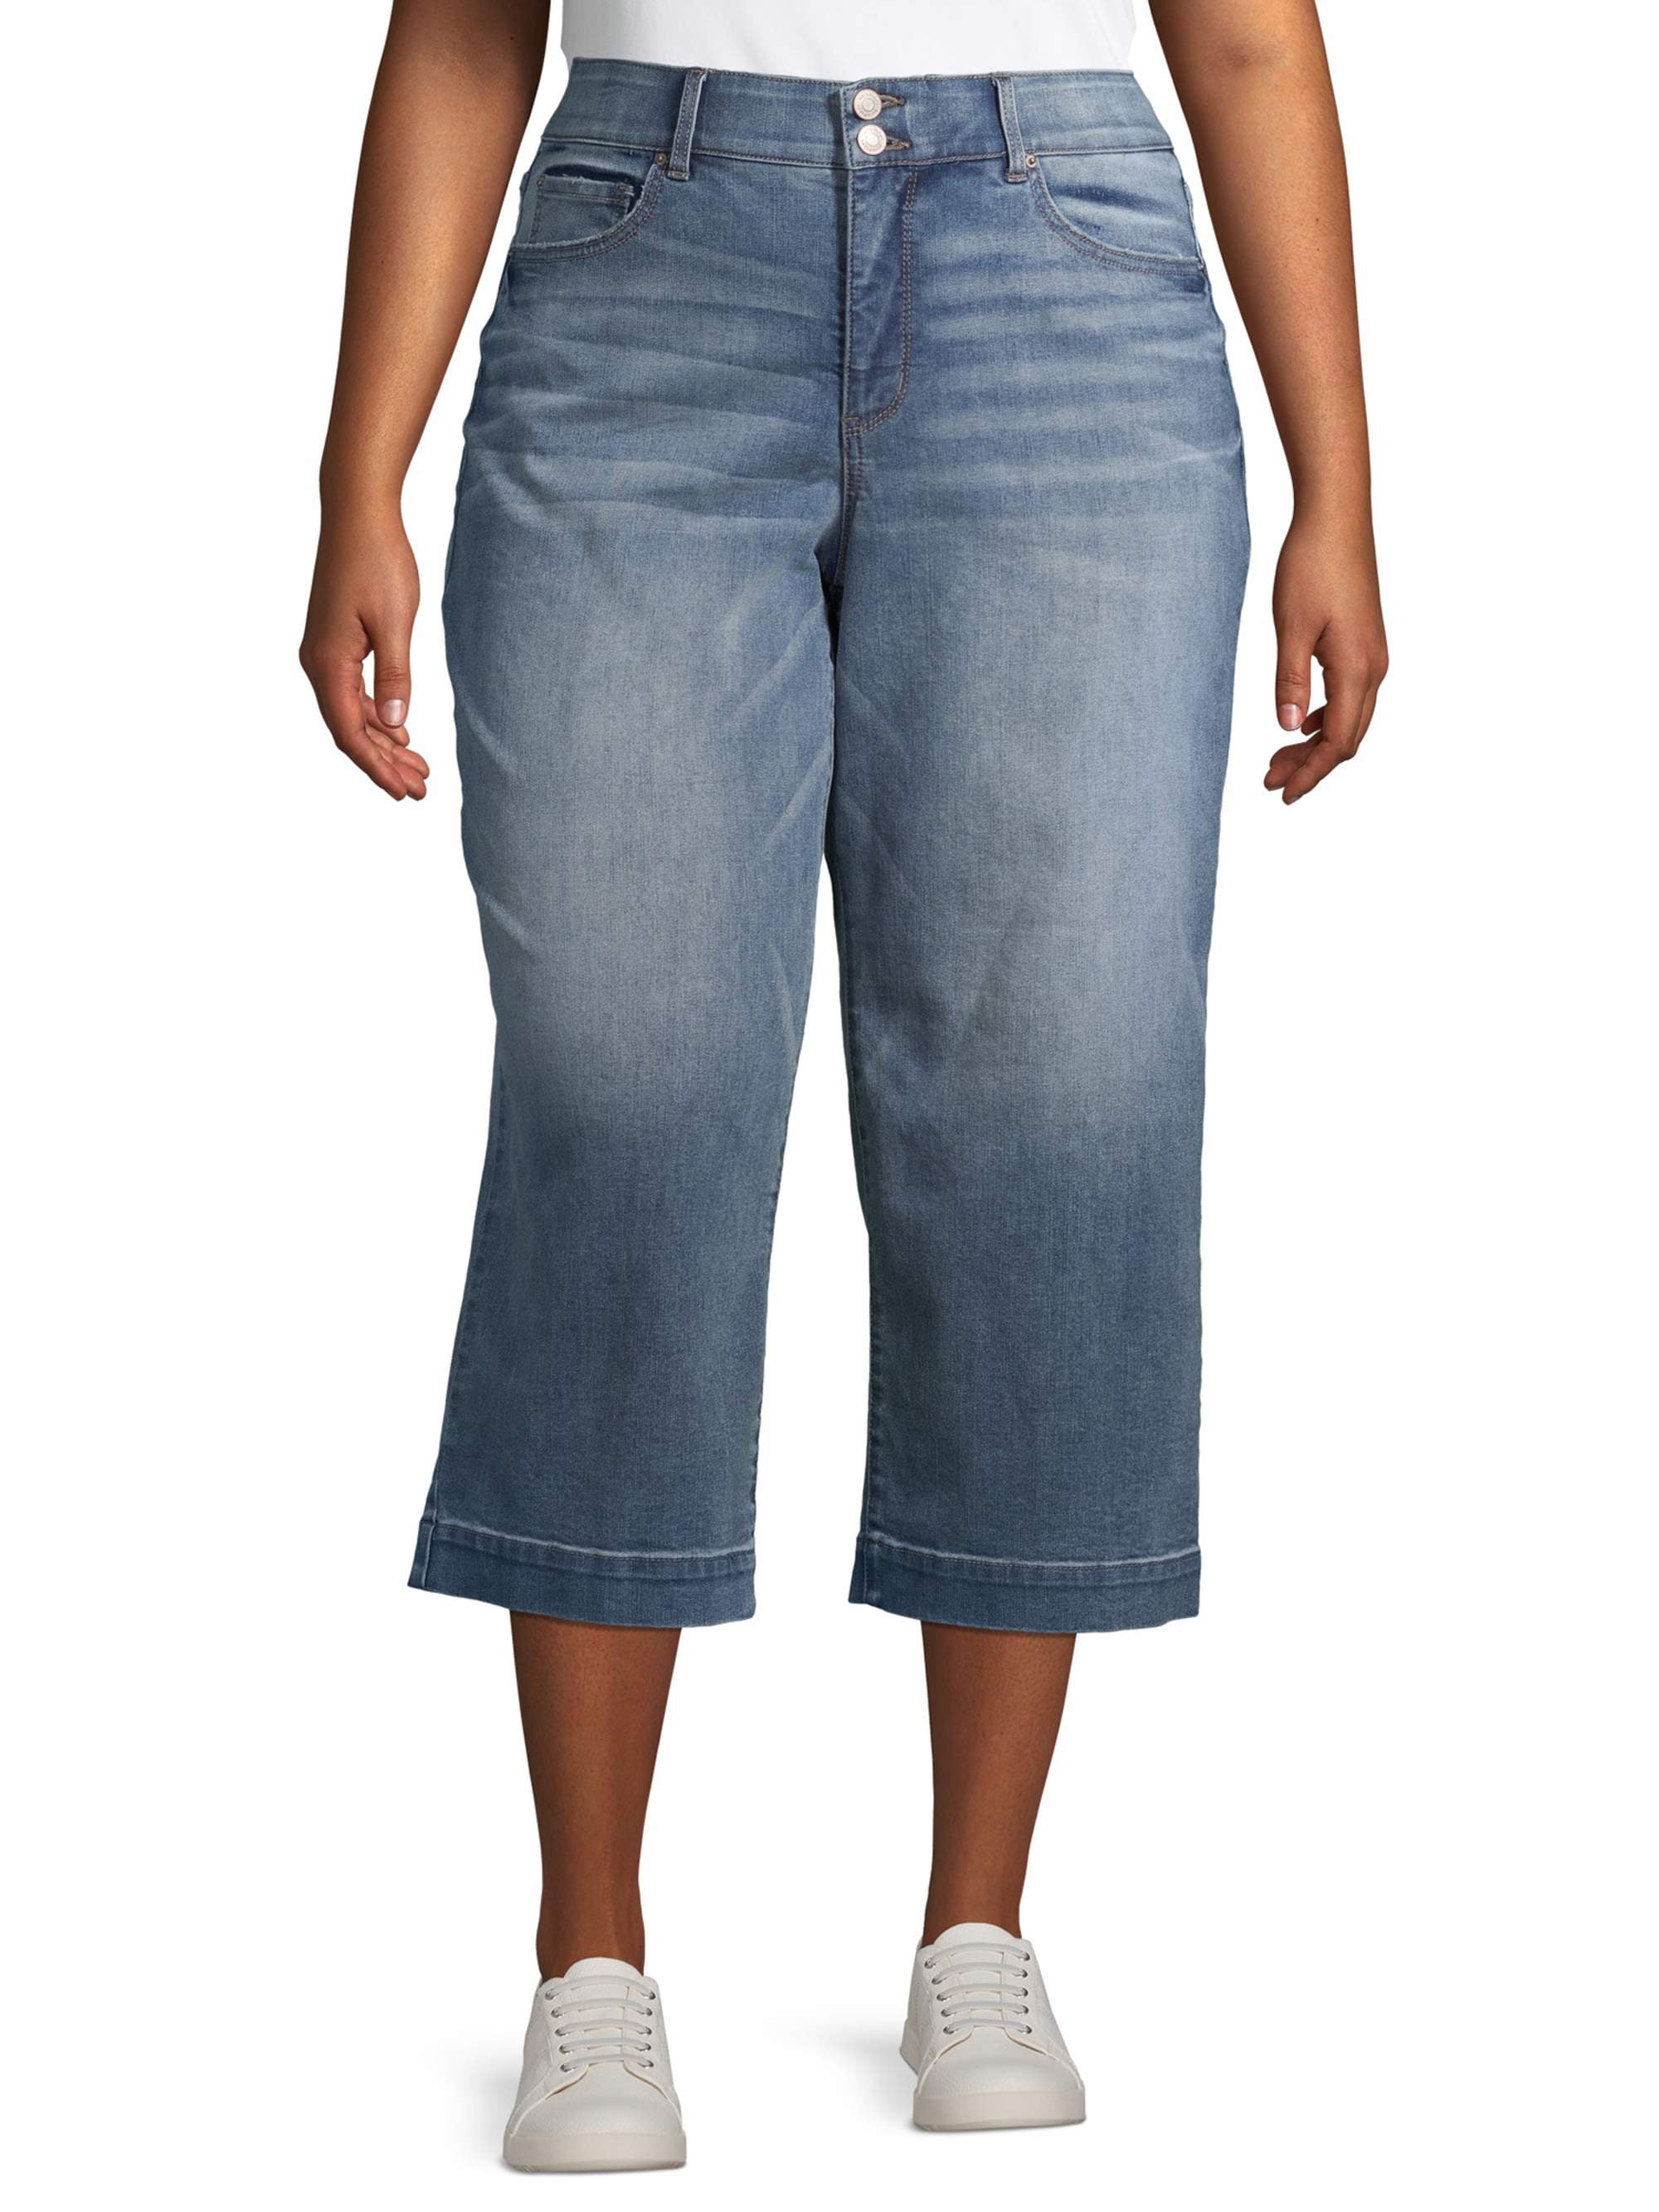 terra and sky women's jeans